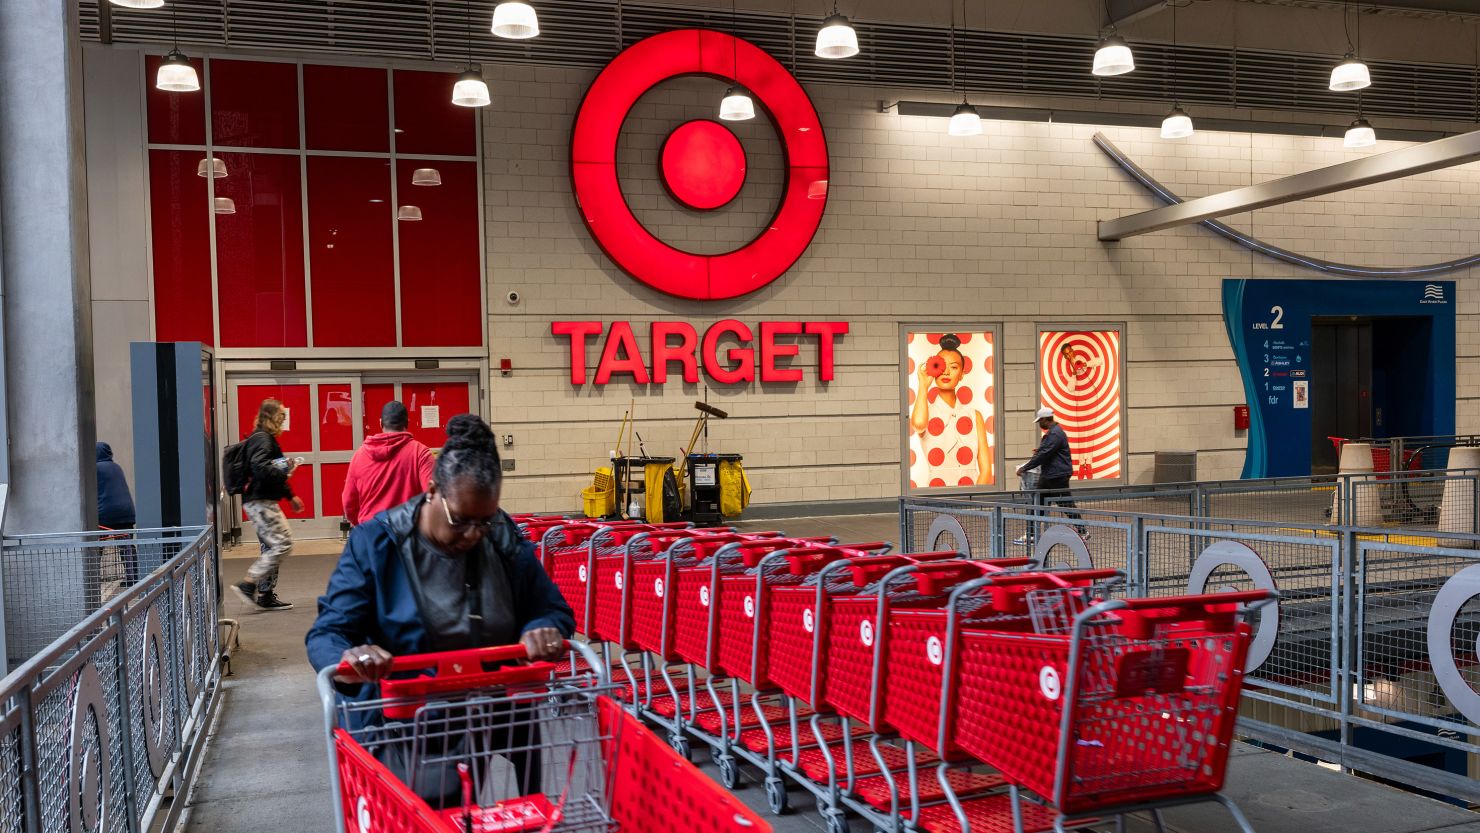 Target said its lower prices will aim to “collectively save consumers millions of dollars” on household staples and everyday items such as milk, fresh fruit, diapers and even pet food.